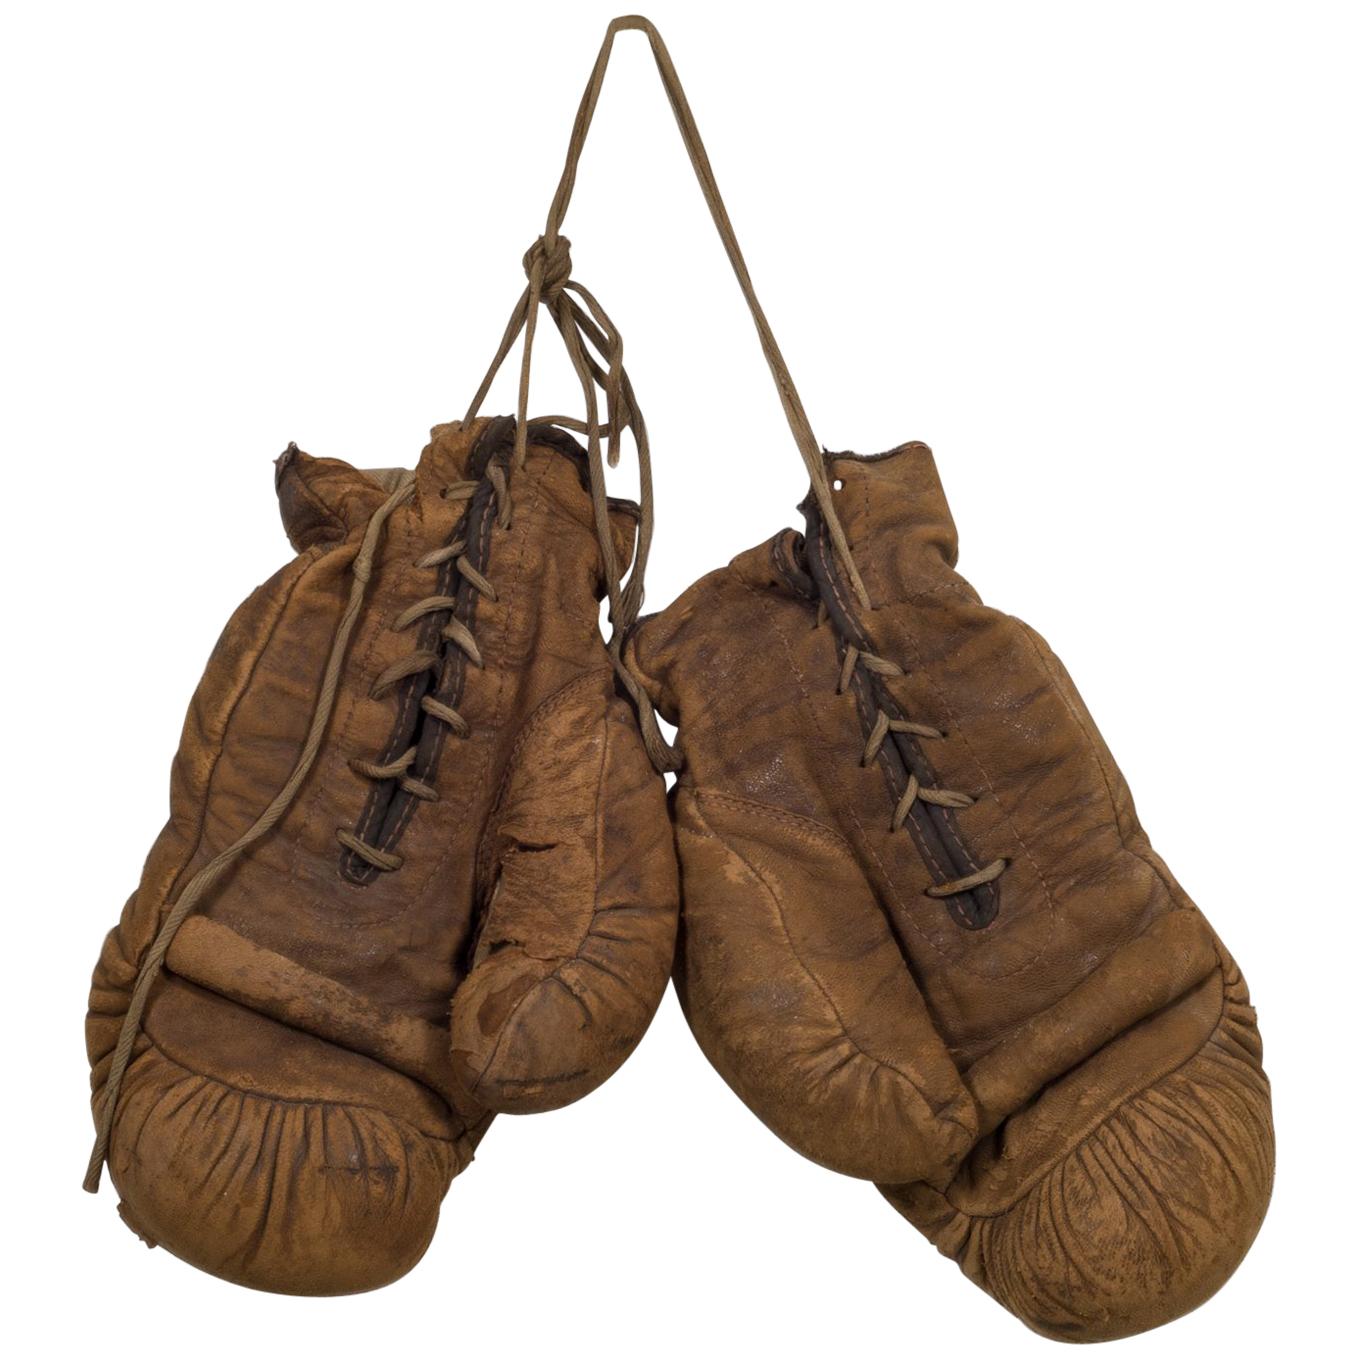 Leather Junior Boxing Gloves by A.J. Reach Company, circa 1874-1934